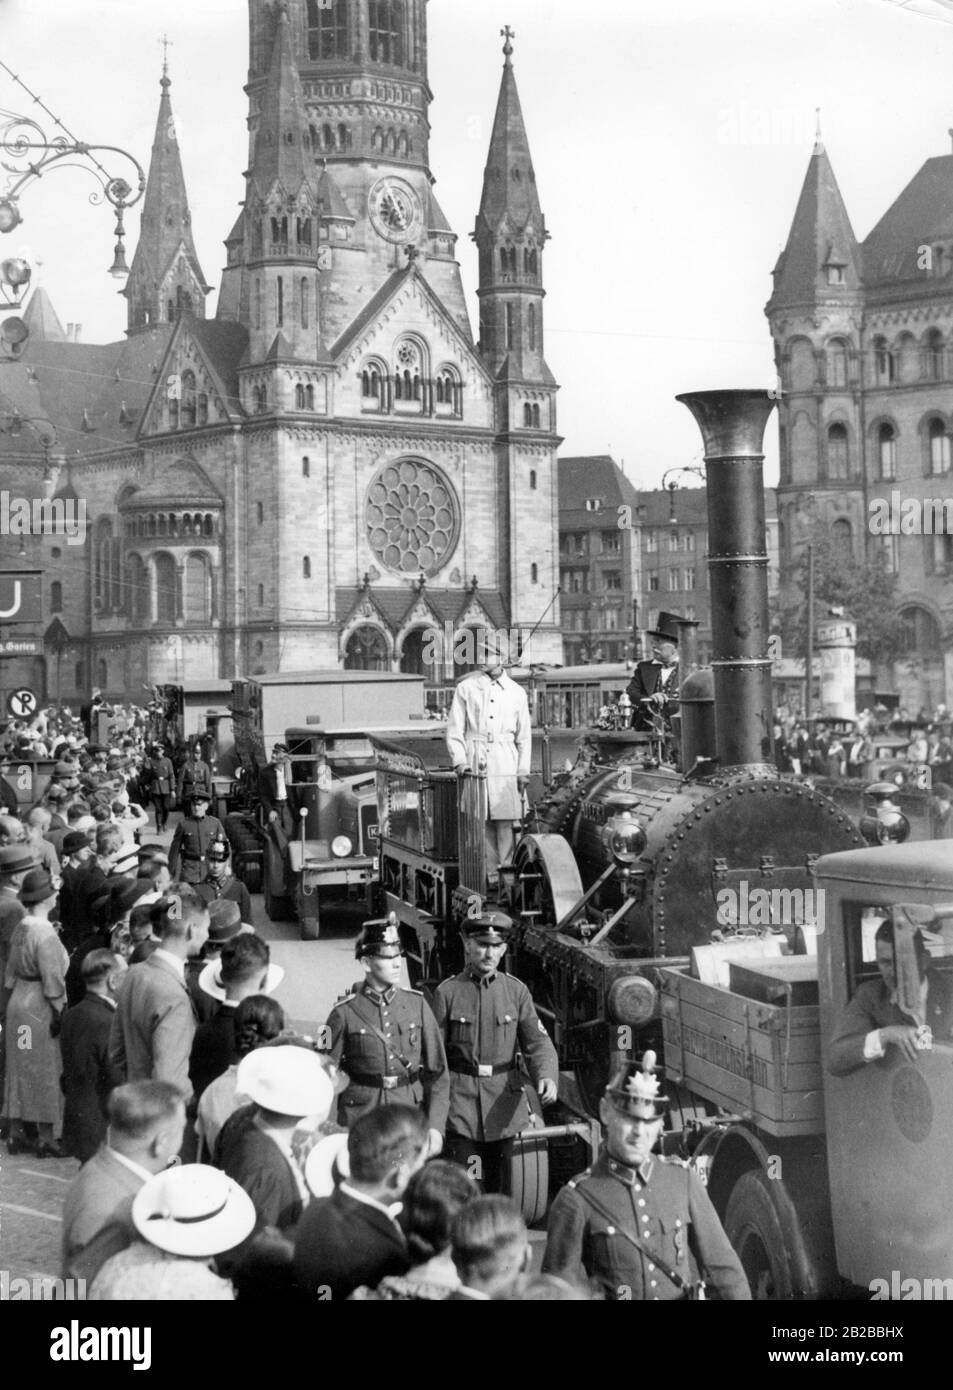 The replica of the first German locomotive 'Adler' is transported to the exhibition halls at Kaiserdamm in Berlin. The truck with the locomotive passes in front of the Kaiser Wilhelm Memorial Church, which can be seen in the background. Many people stand on the roadside. An SA man in white coat is standing on the locomotive. The train is accompanied by SS men with swastikas and policemen. Stock Photo